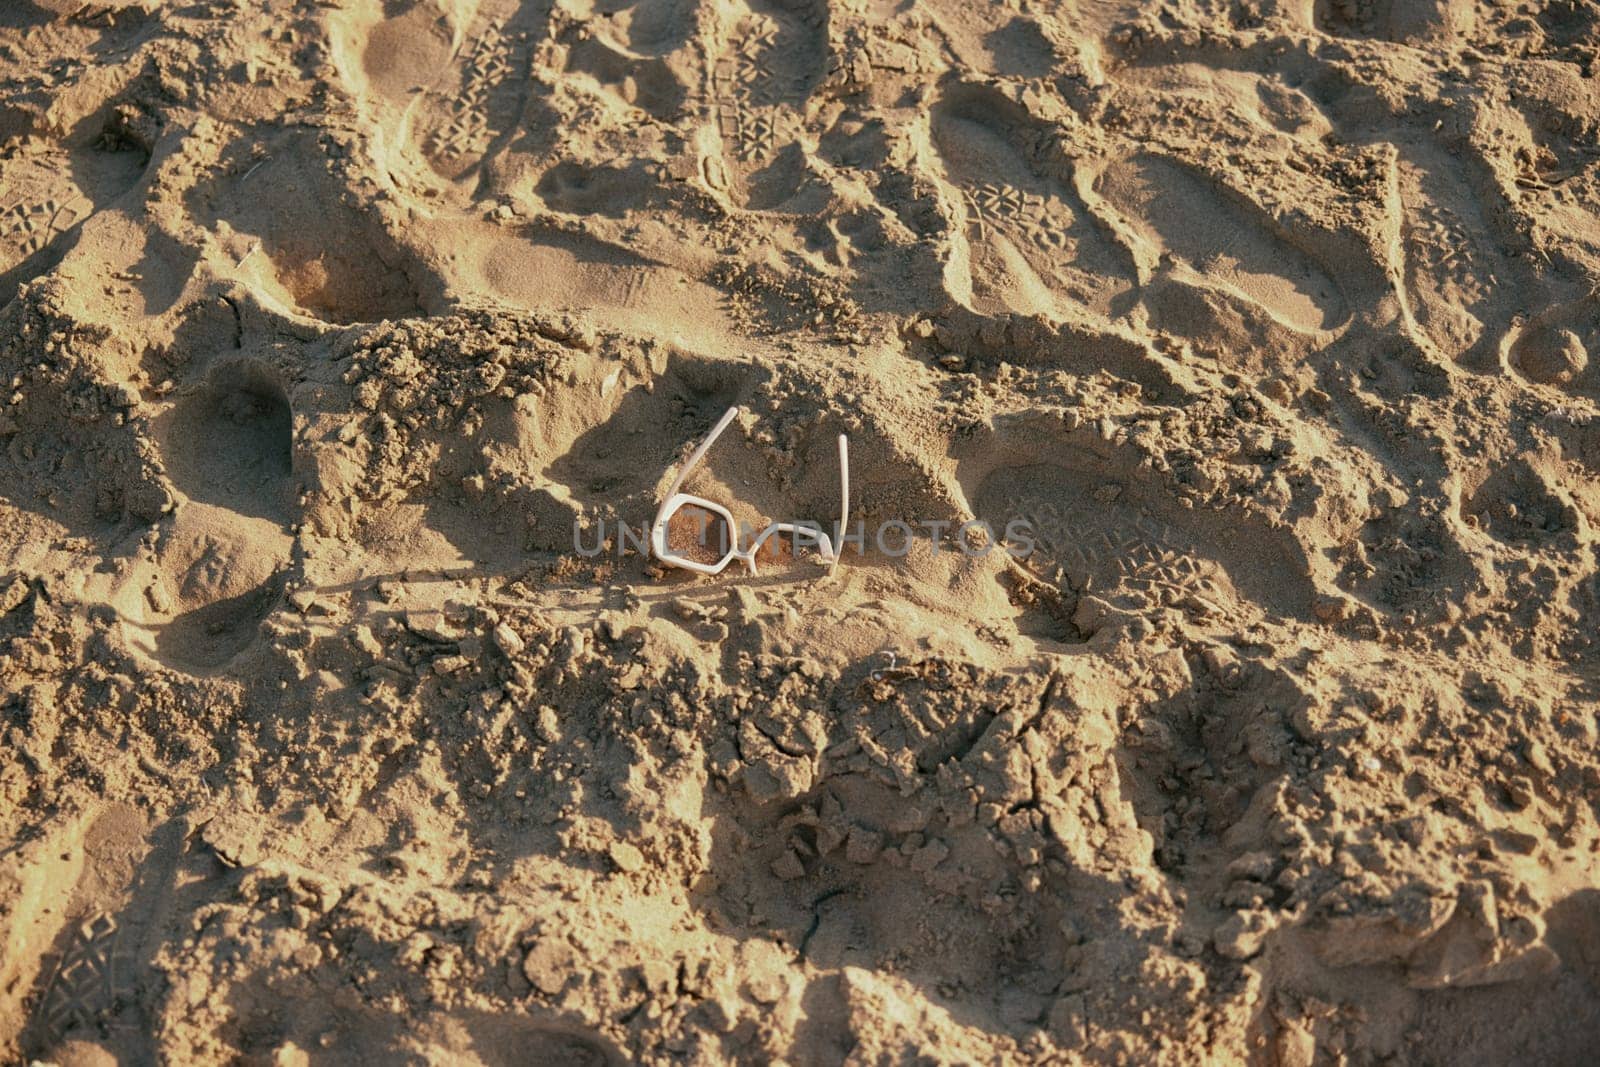 light, massive glasses lying in the sand near the sea. High quality photo